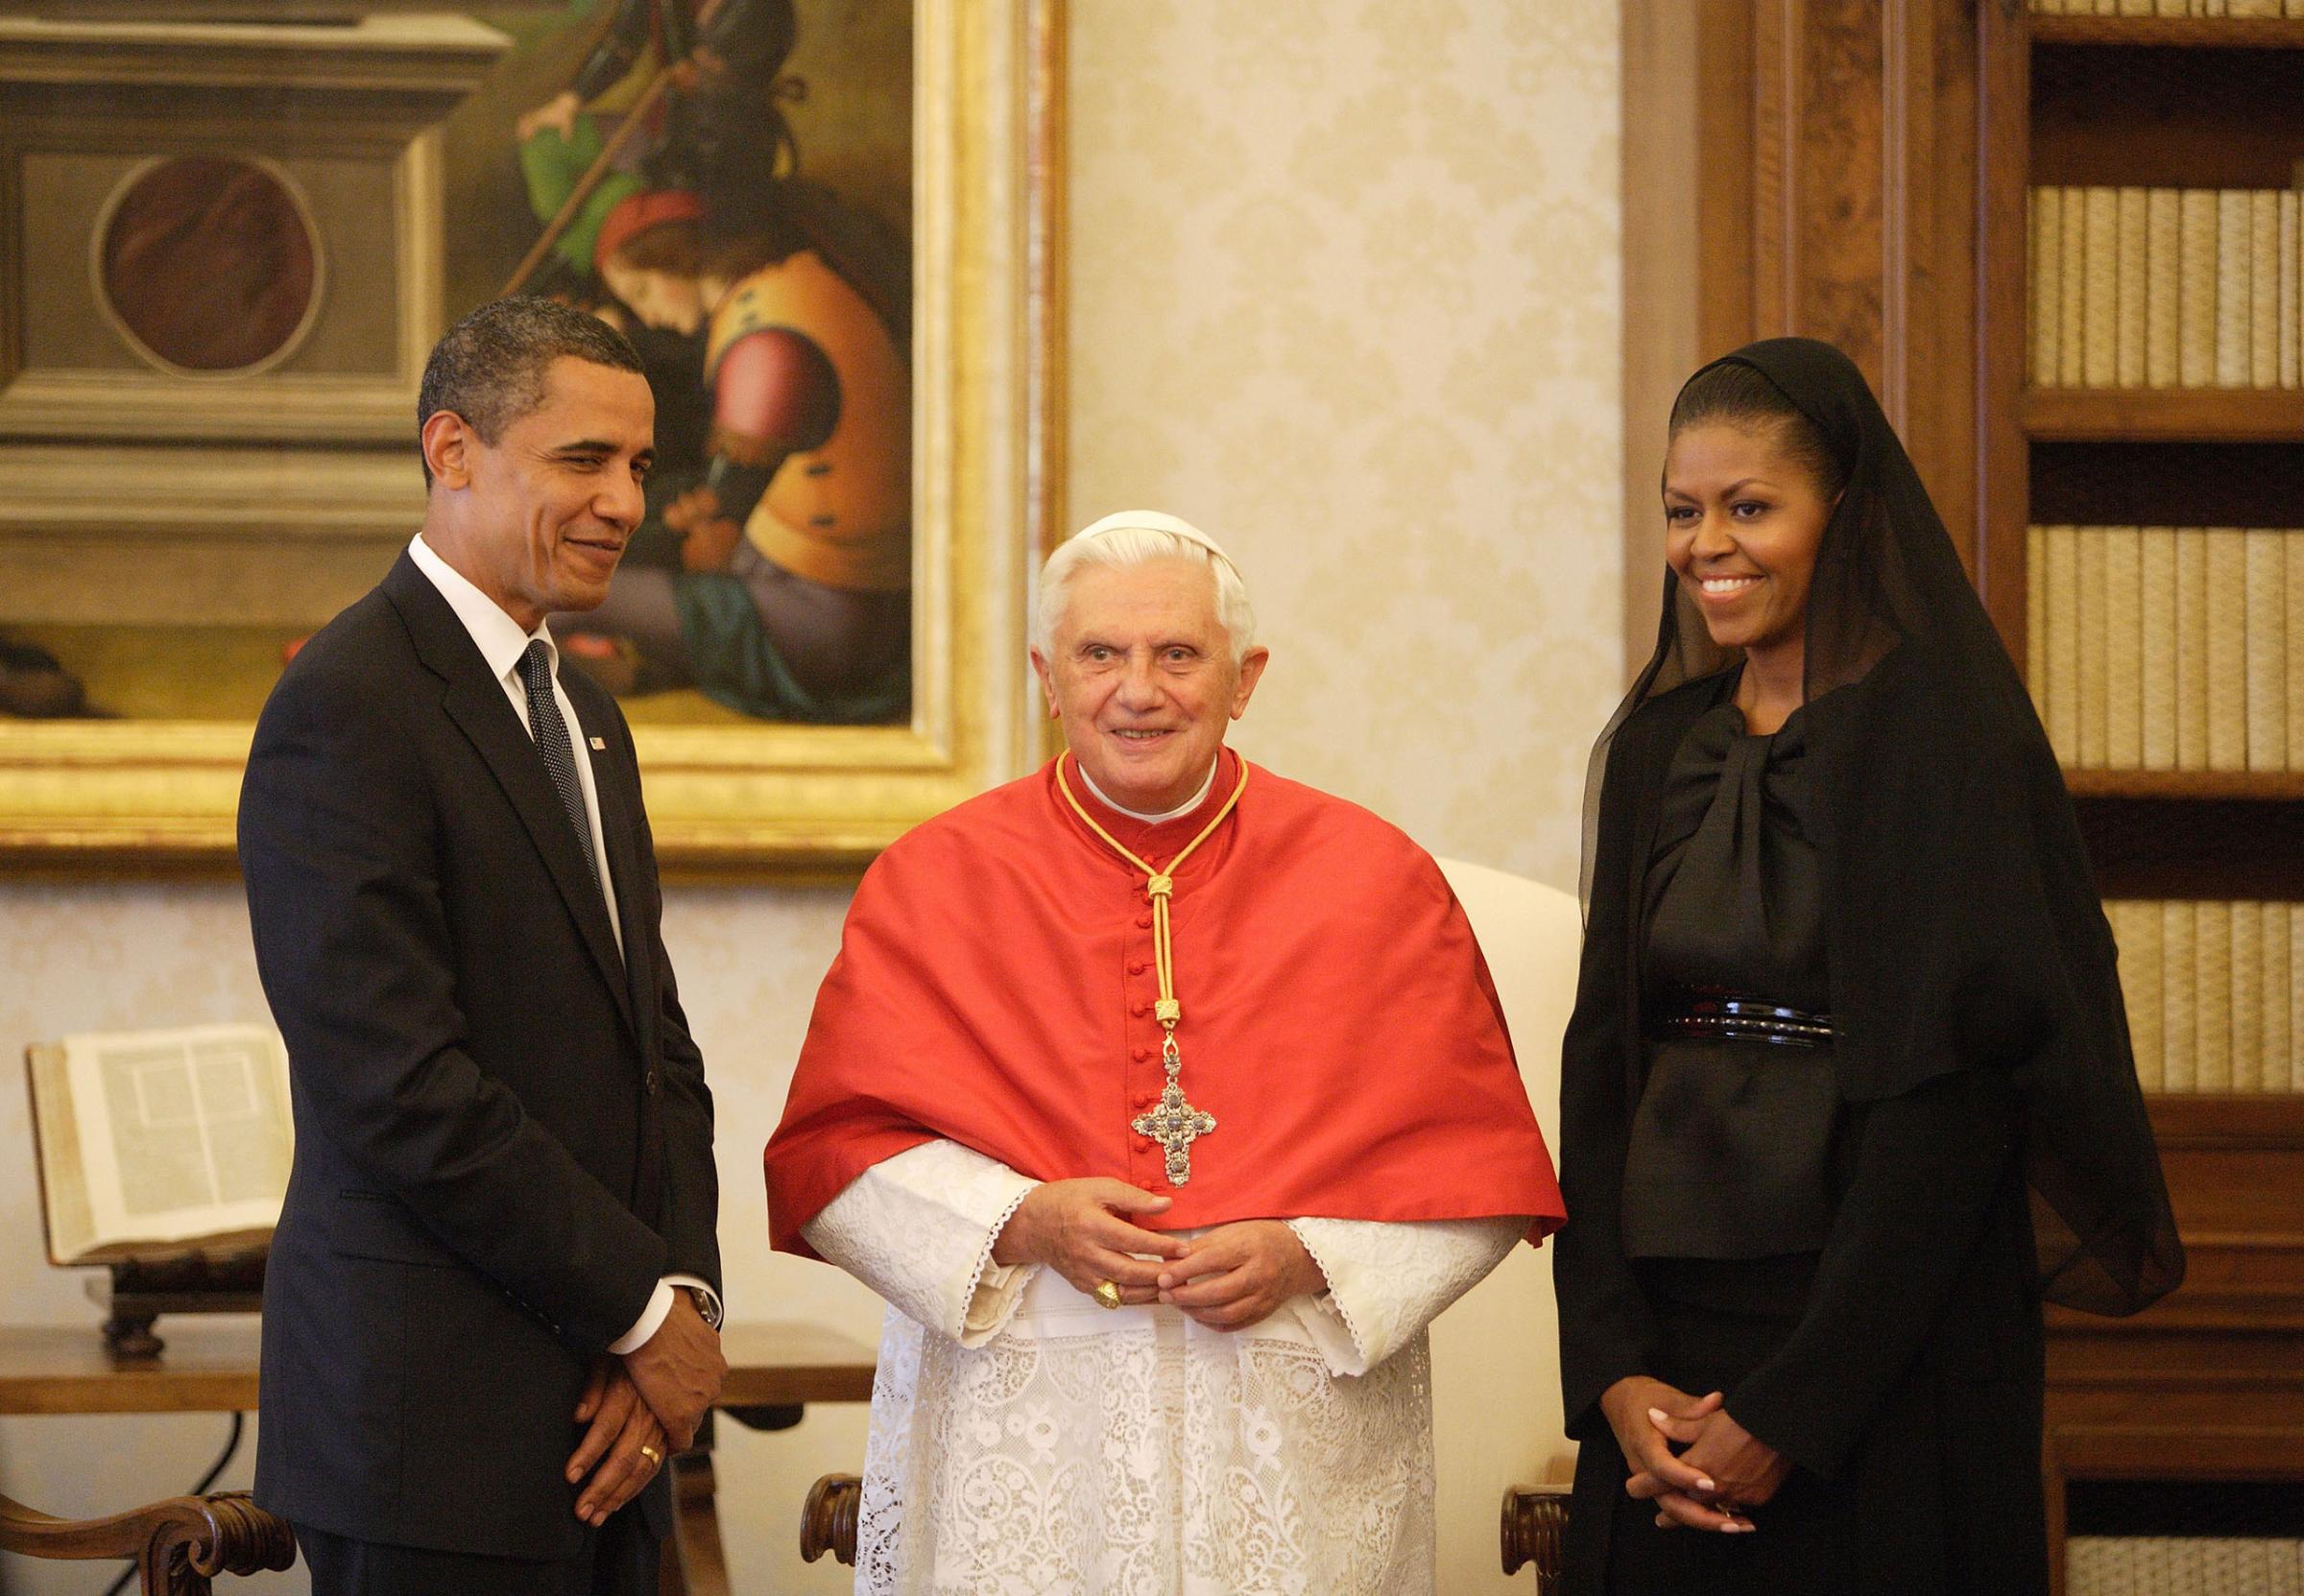 US President Barack Obama (L) and First Lady Michelle Obama meet with Pope Benedict XVI in his library at the Vatican on July 10, 2009.